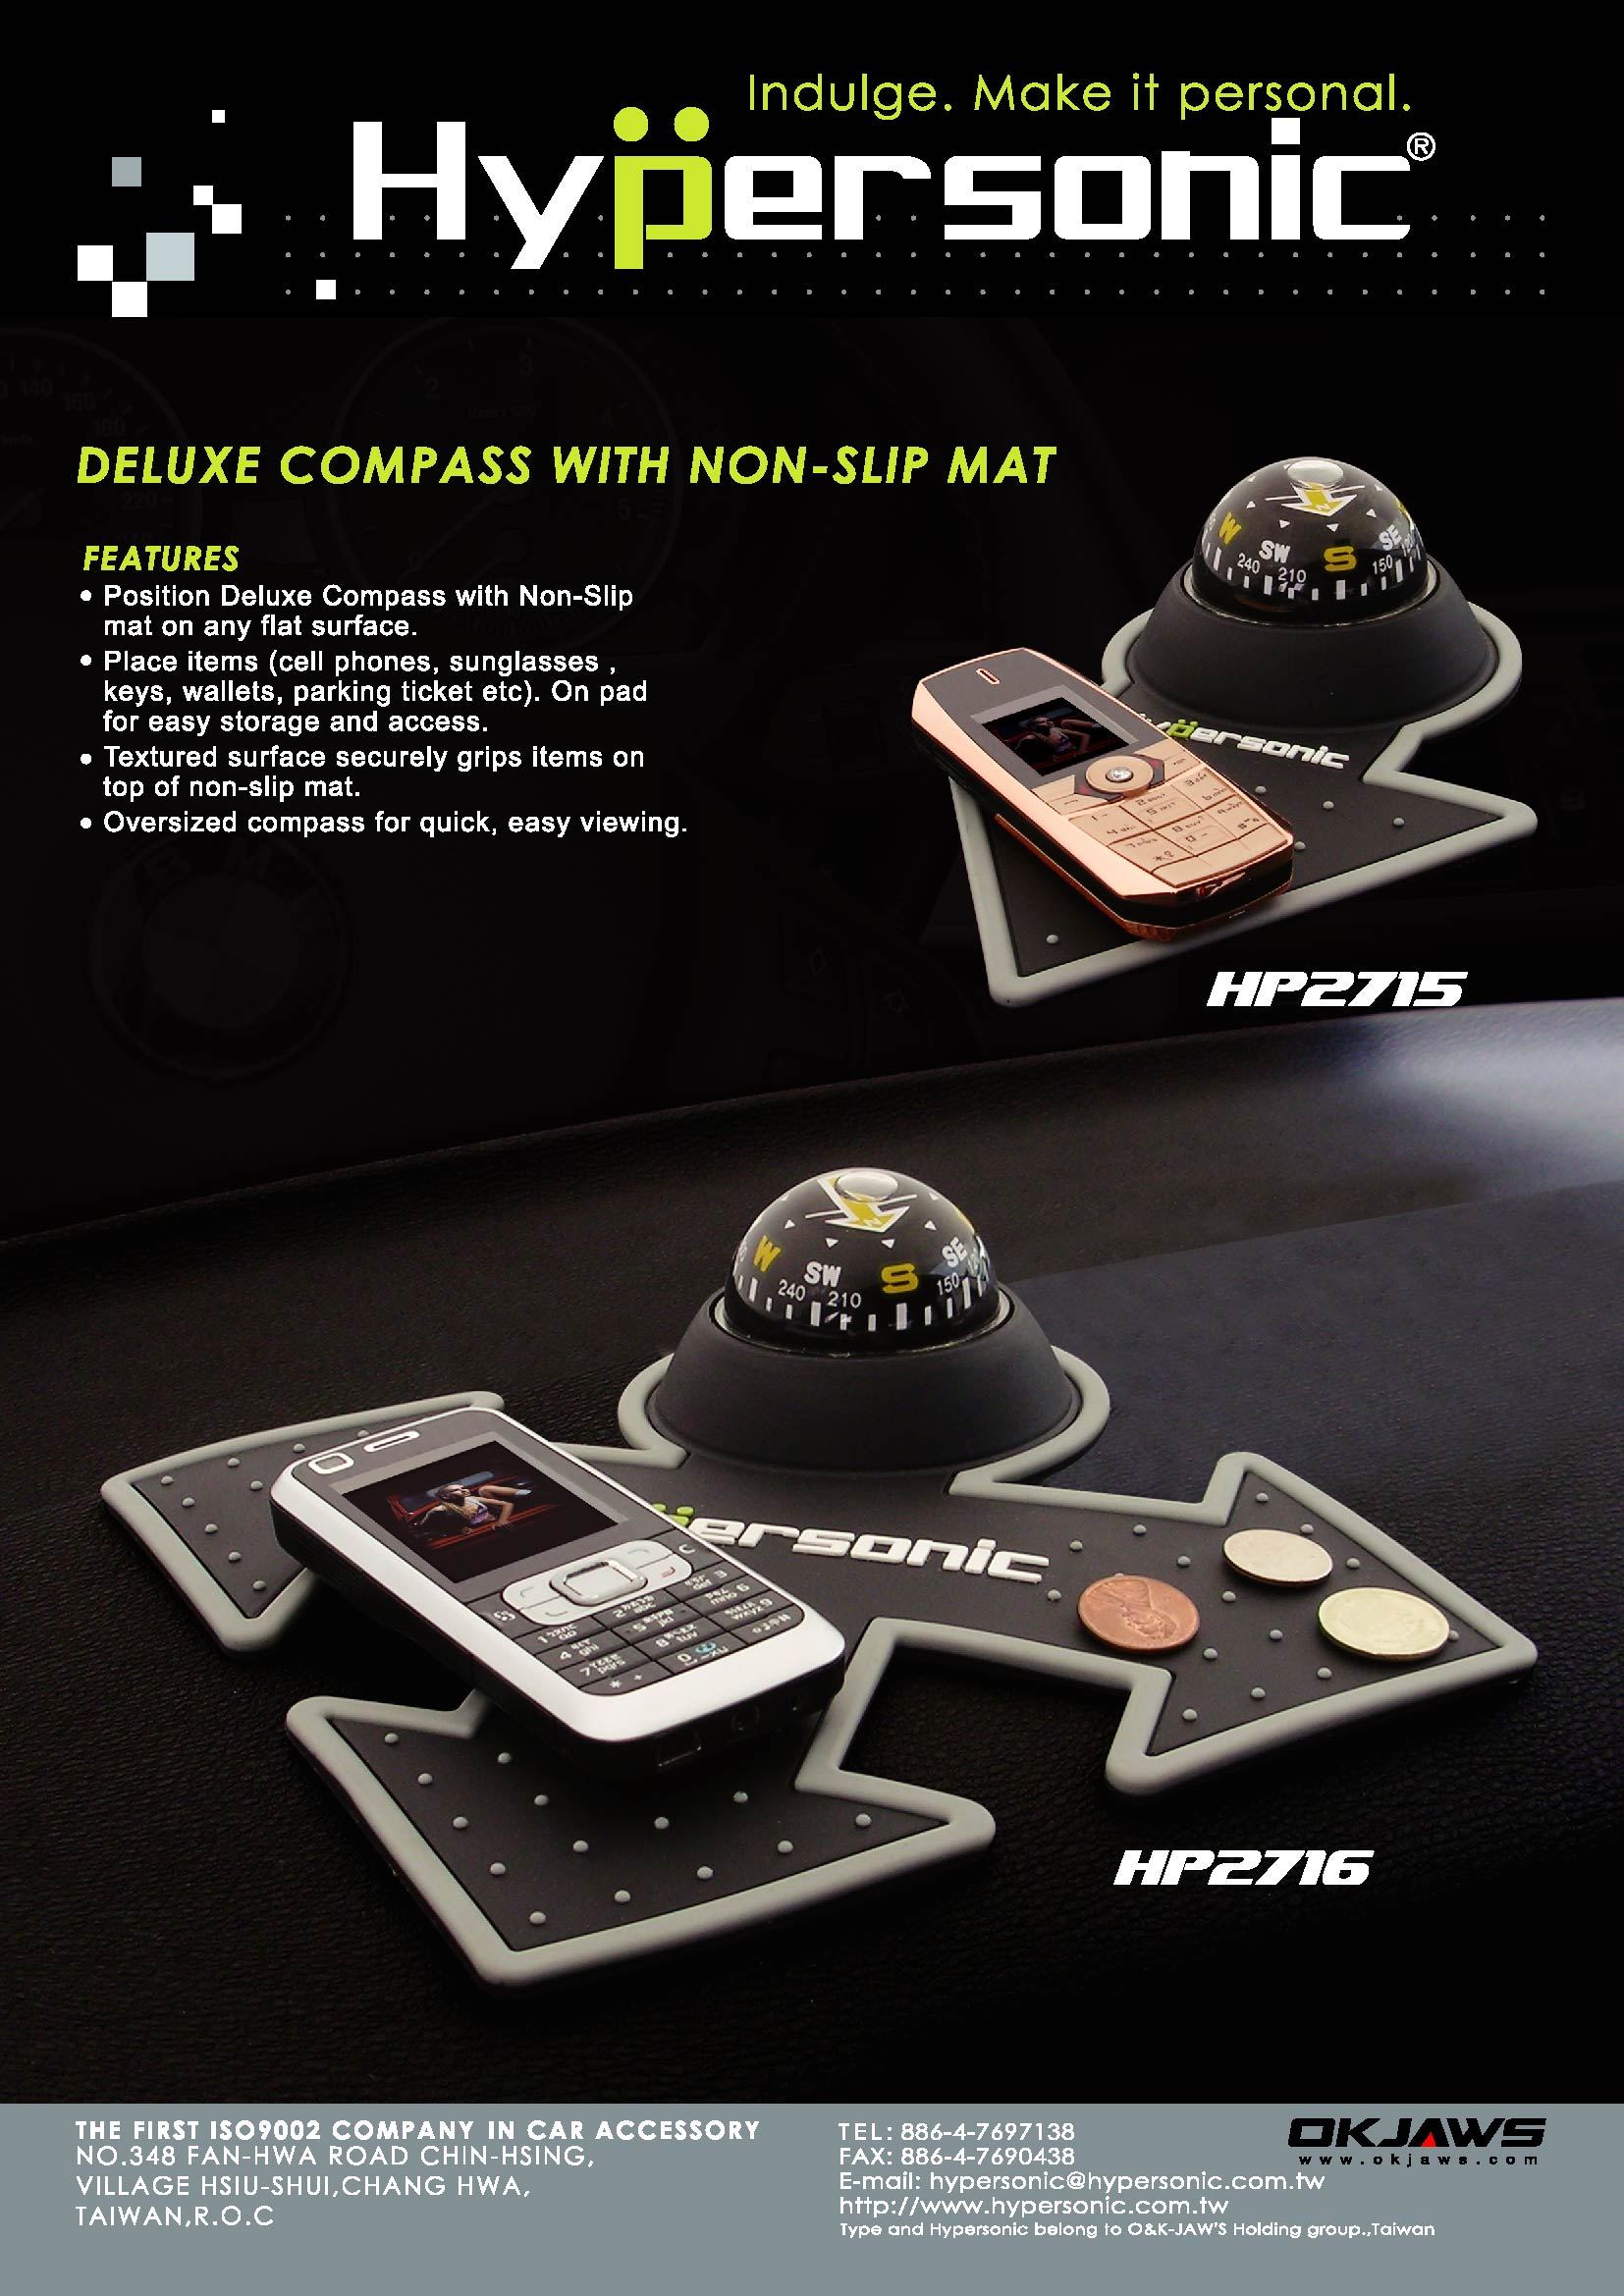 Delux Compass With Non-slip Mat HP2715